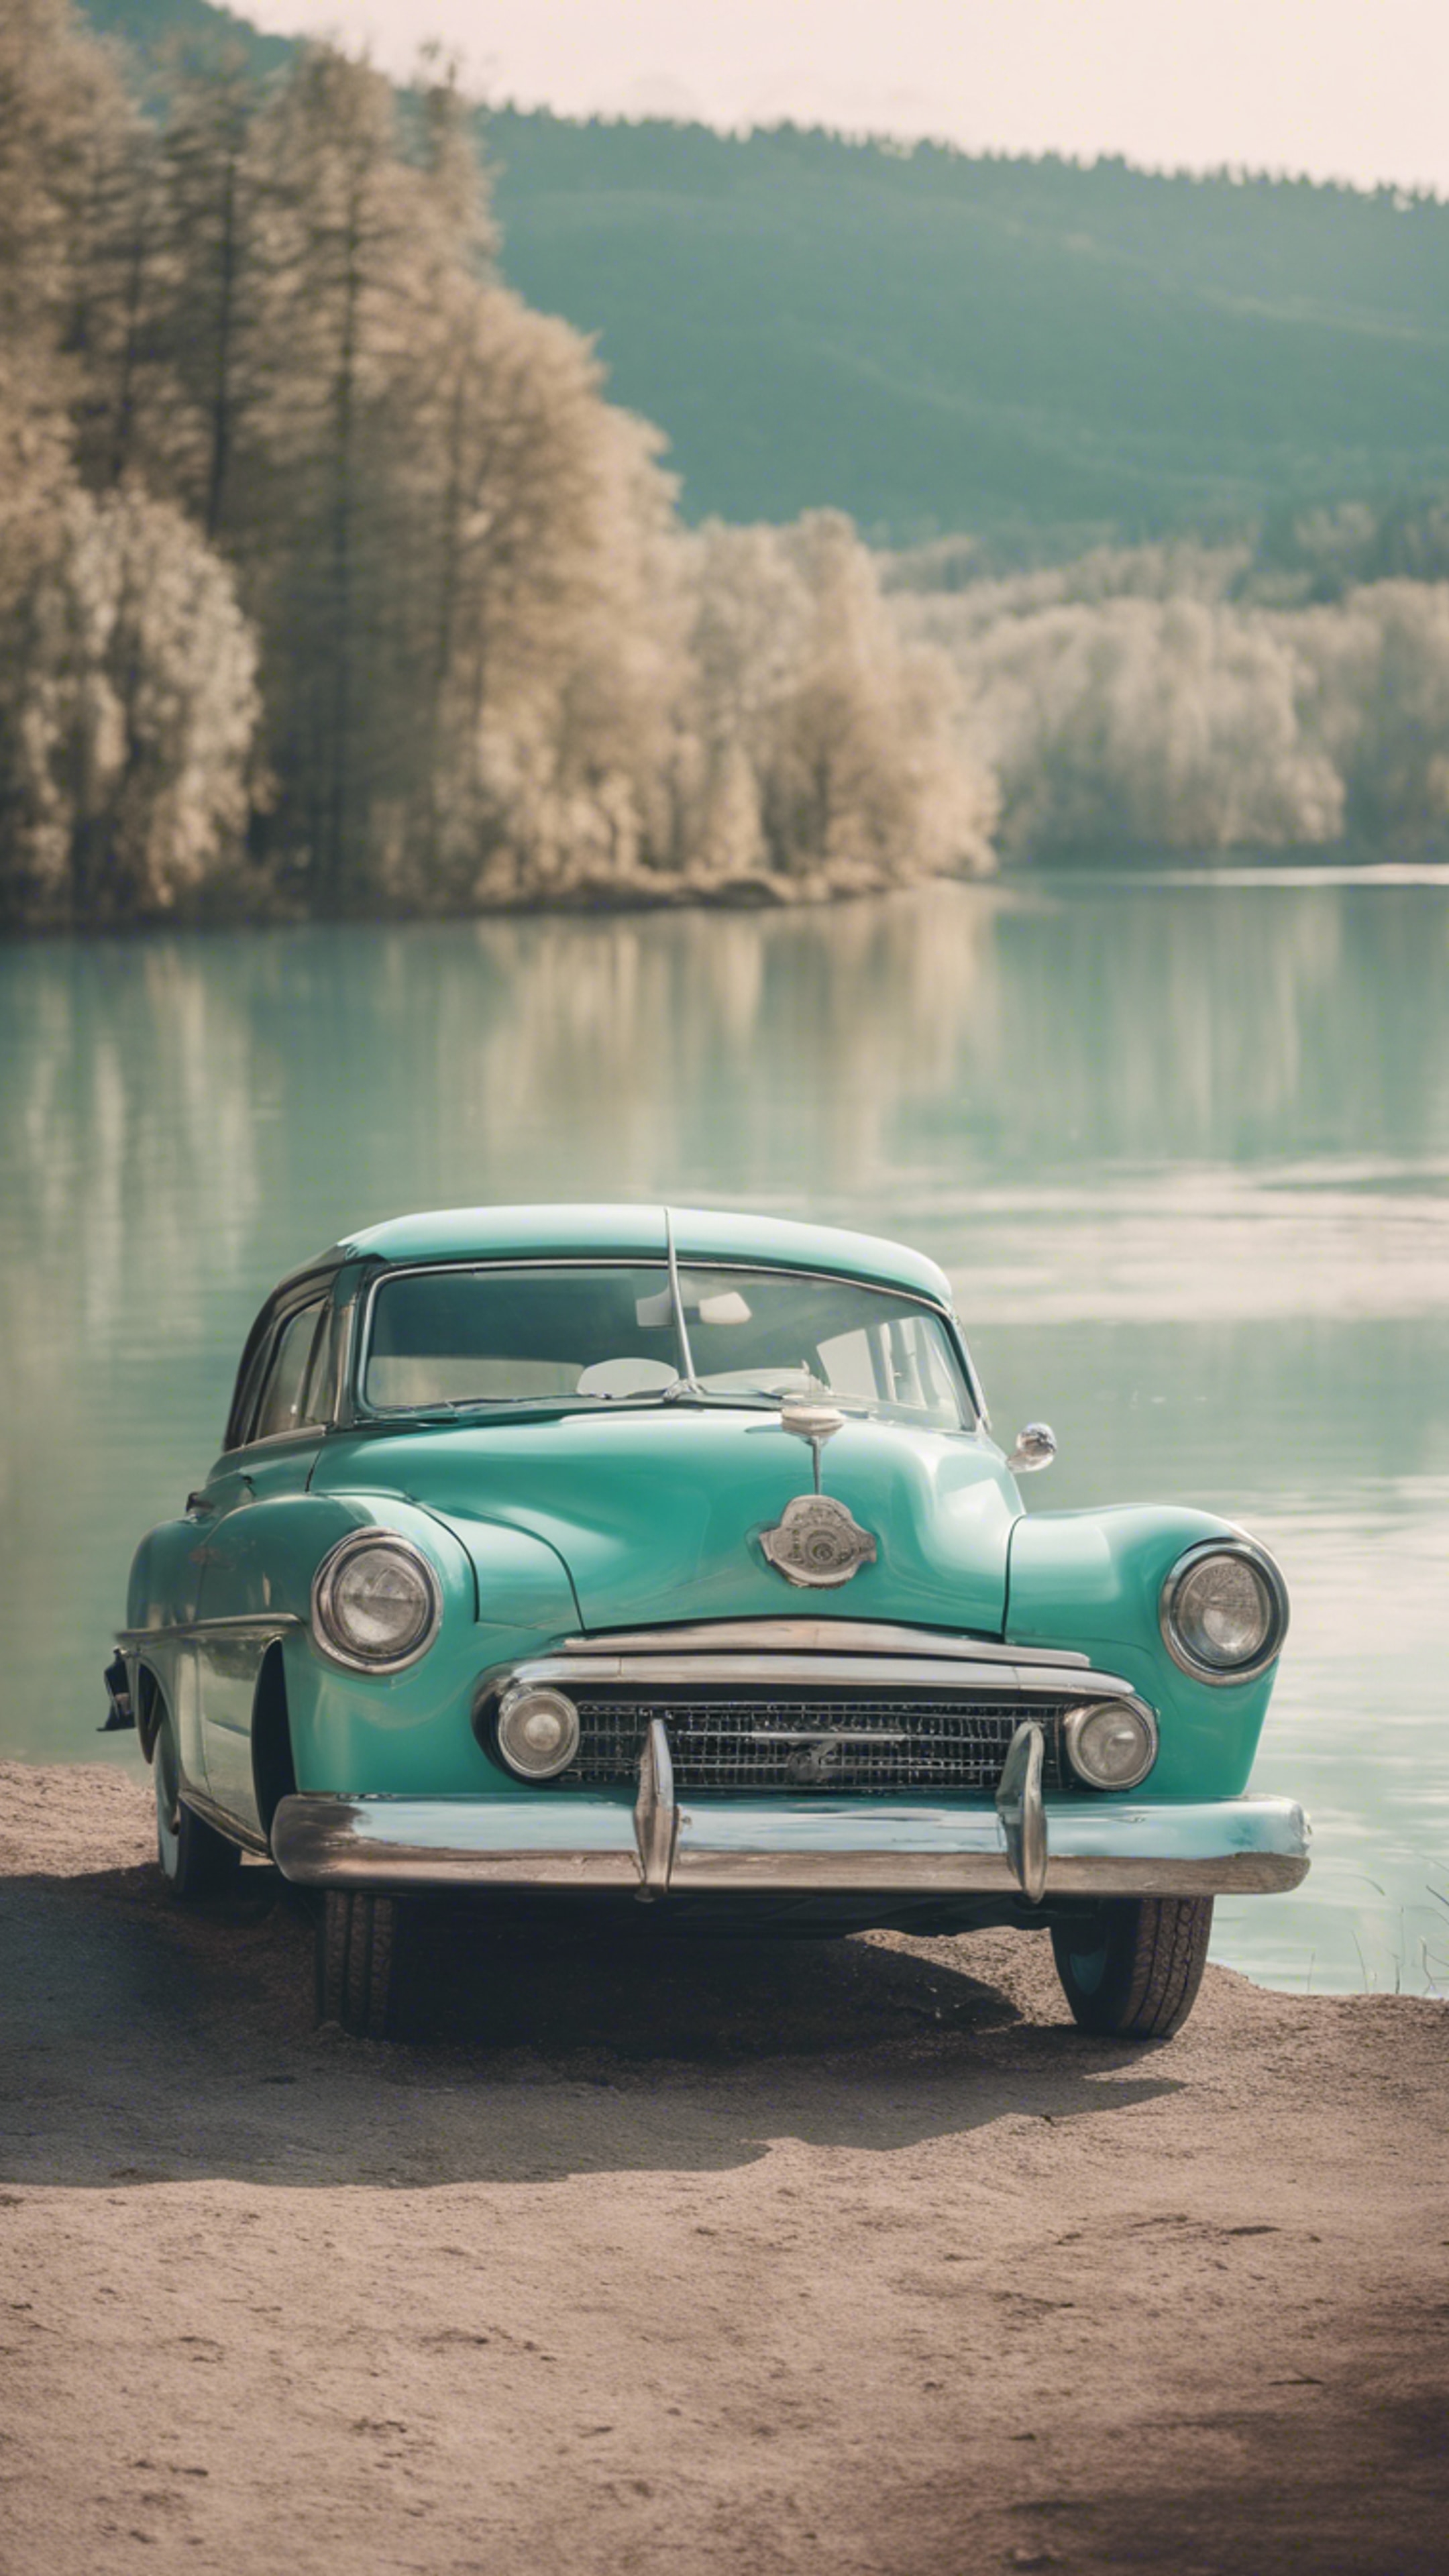 An old, vintage car in cool pastel teal, parked by a beautiful lake.壁紙[2497290a3fc344ac9be5]